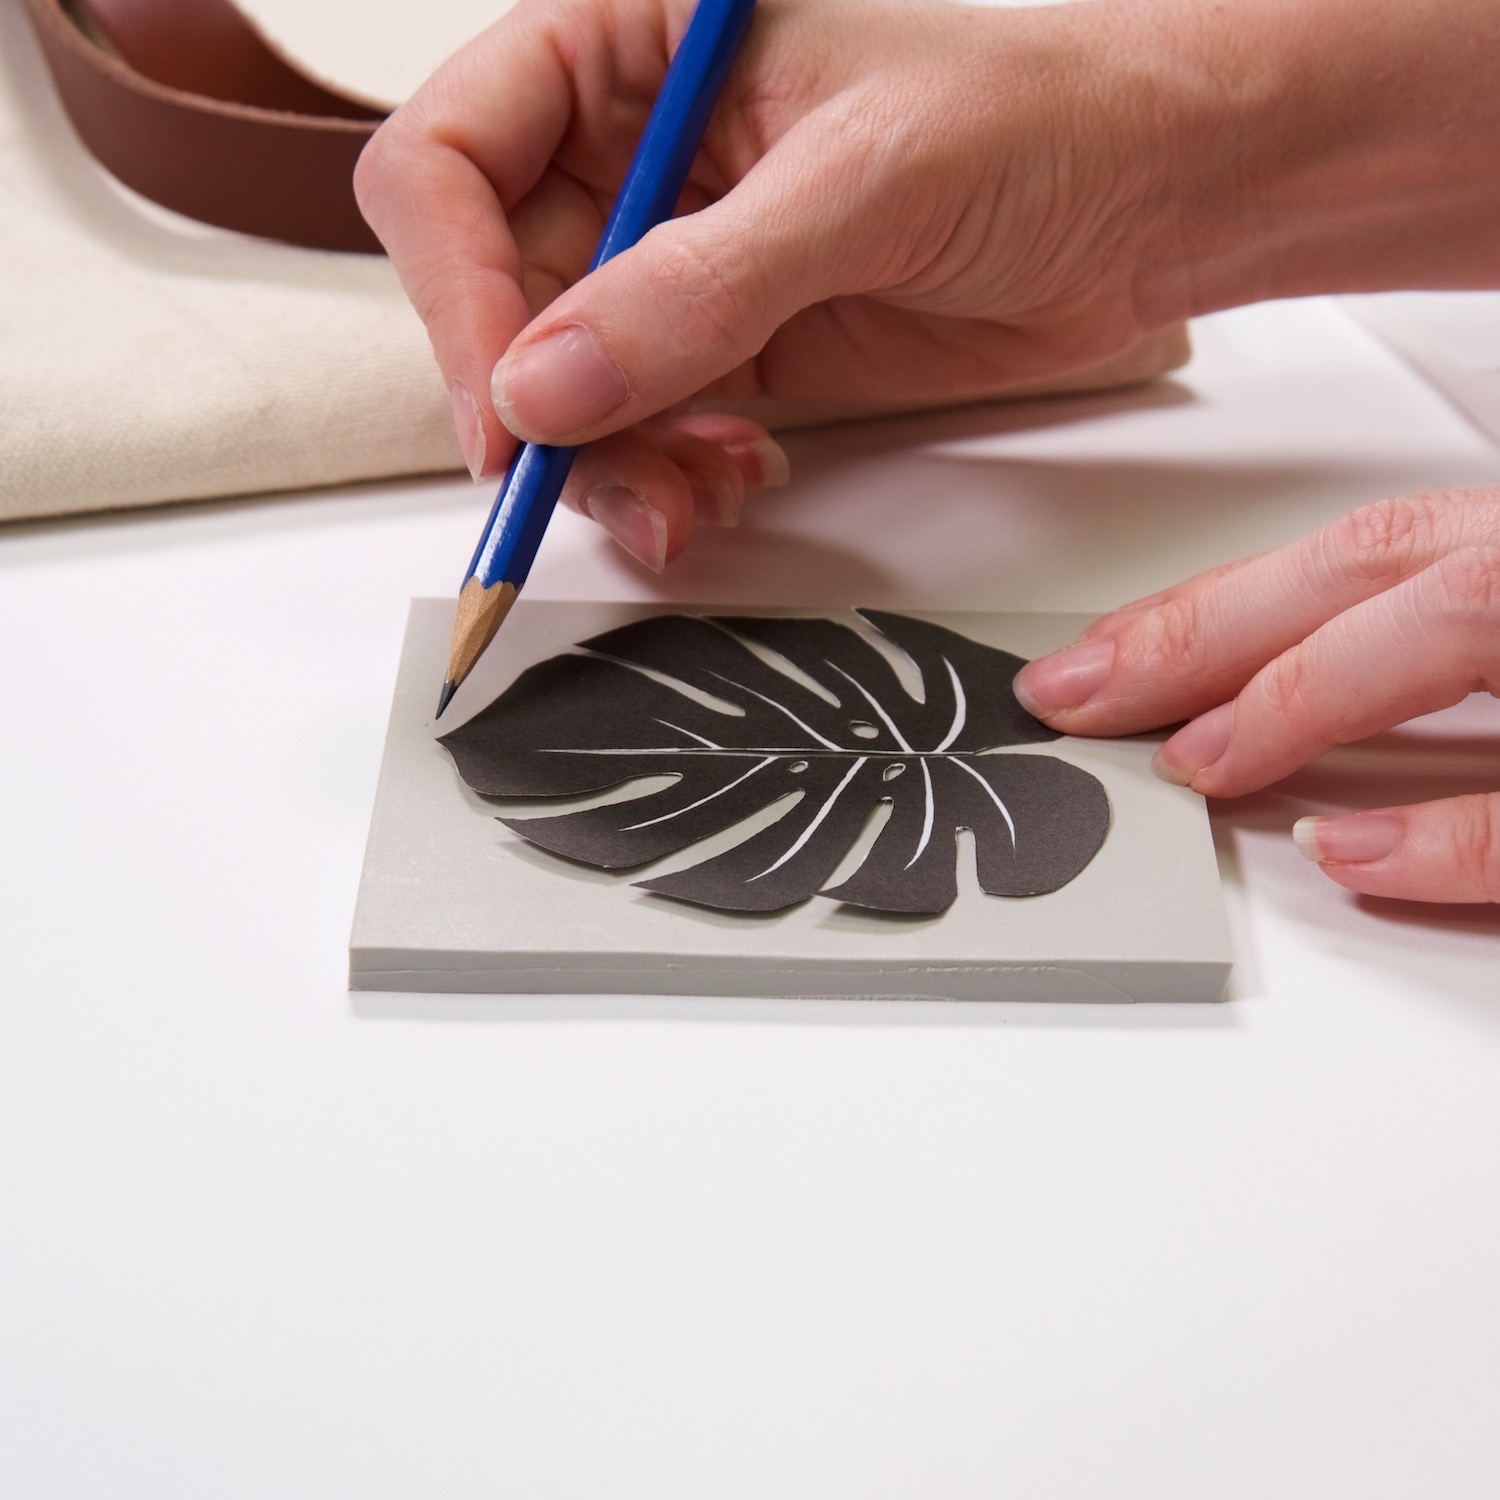 trace the outside of the template to make a linocut